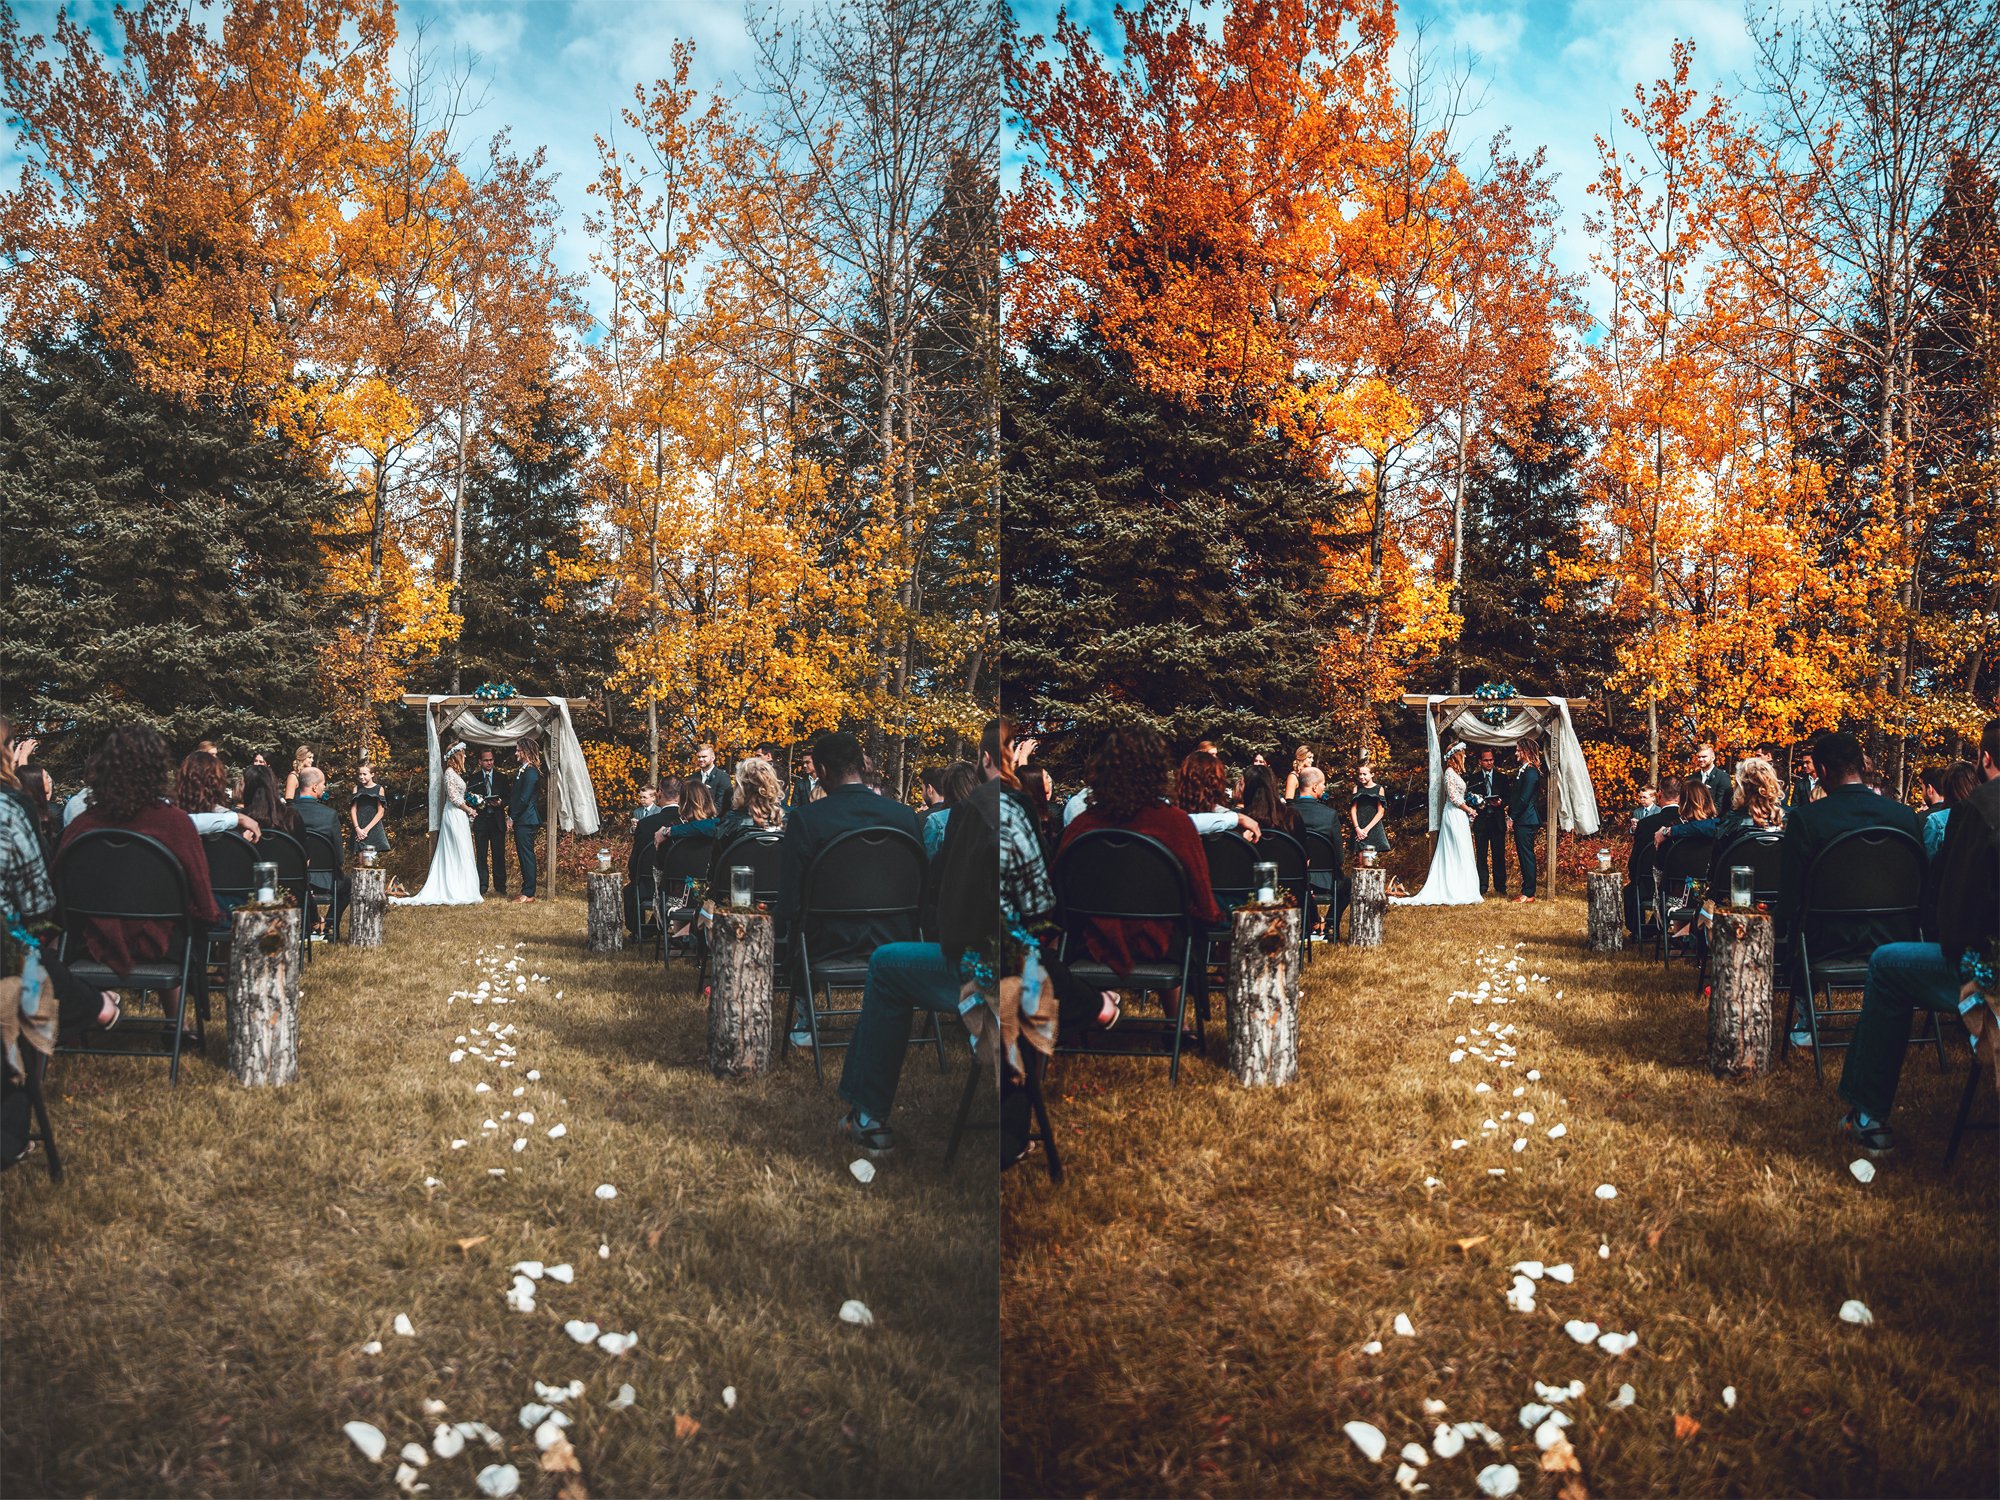 25 Wedding Photoshop Actionspreview image.